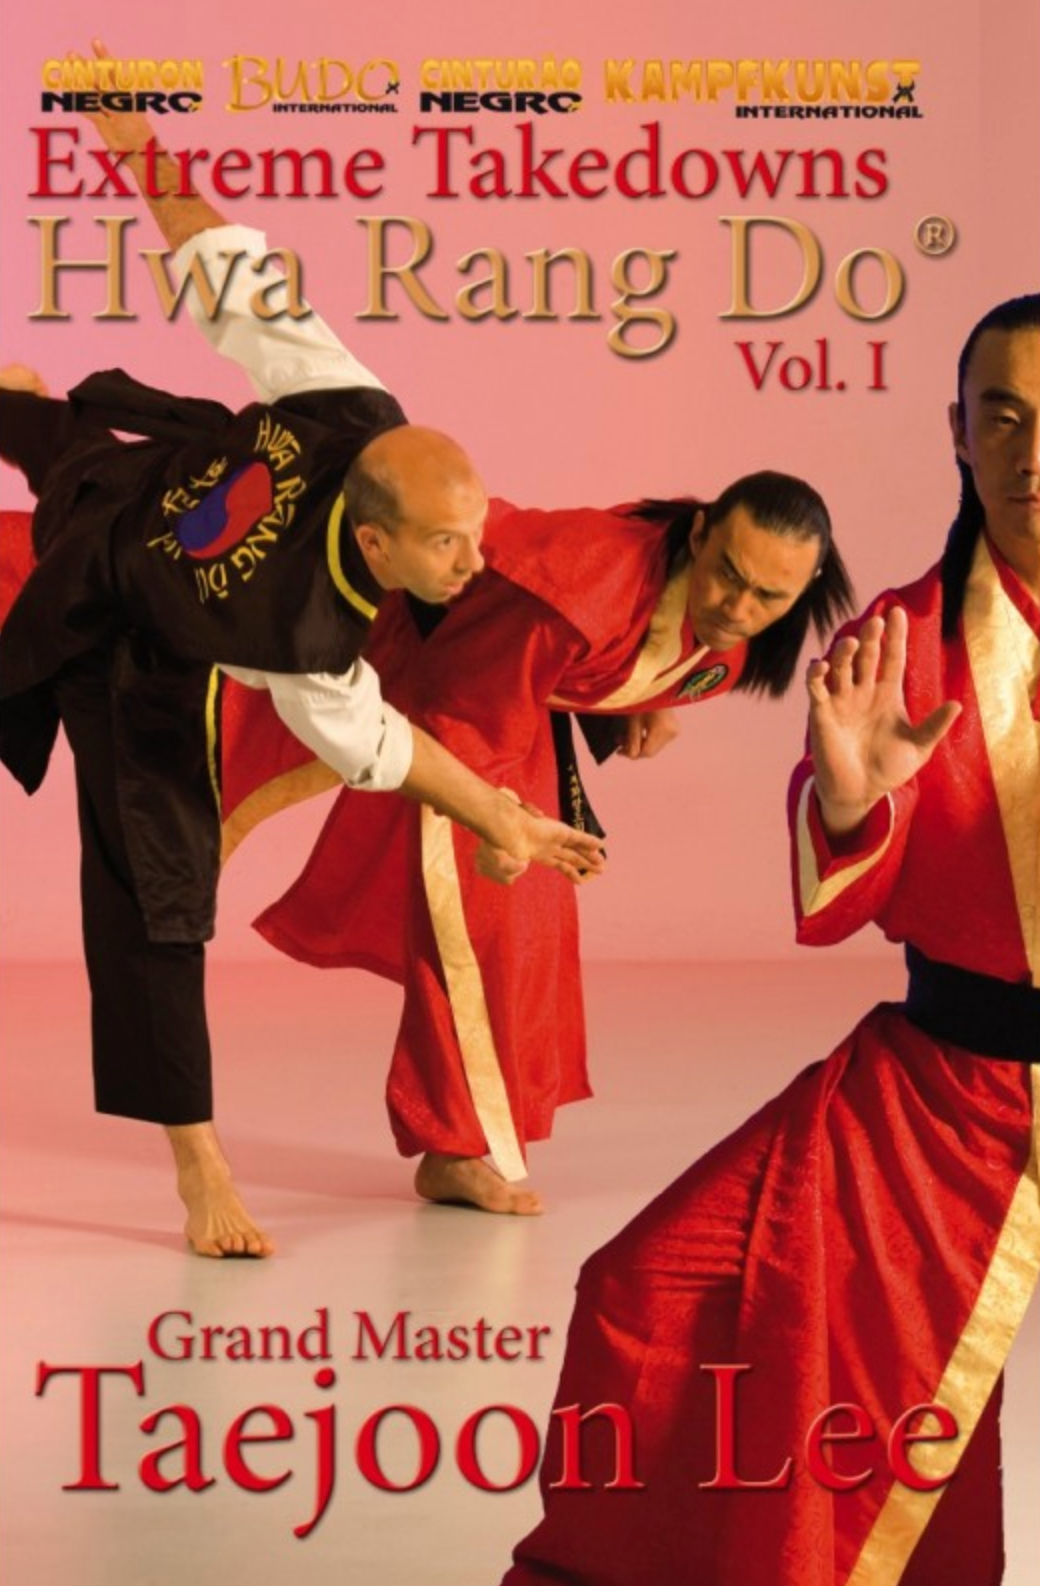 Hwa Rang Do Extreme Takedowns Vol 1 DVD by Taejoon Lee - Budovideos